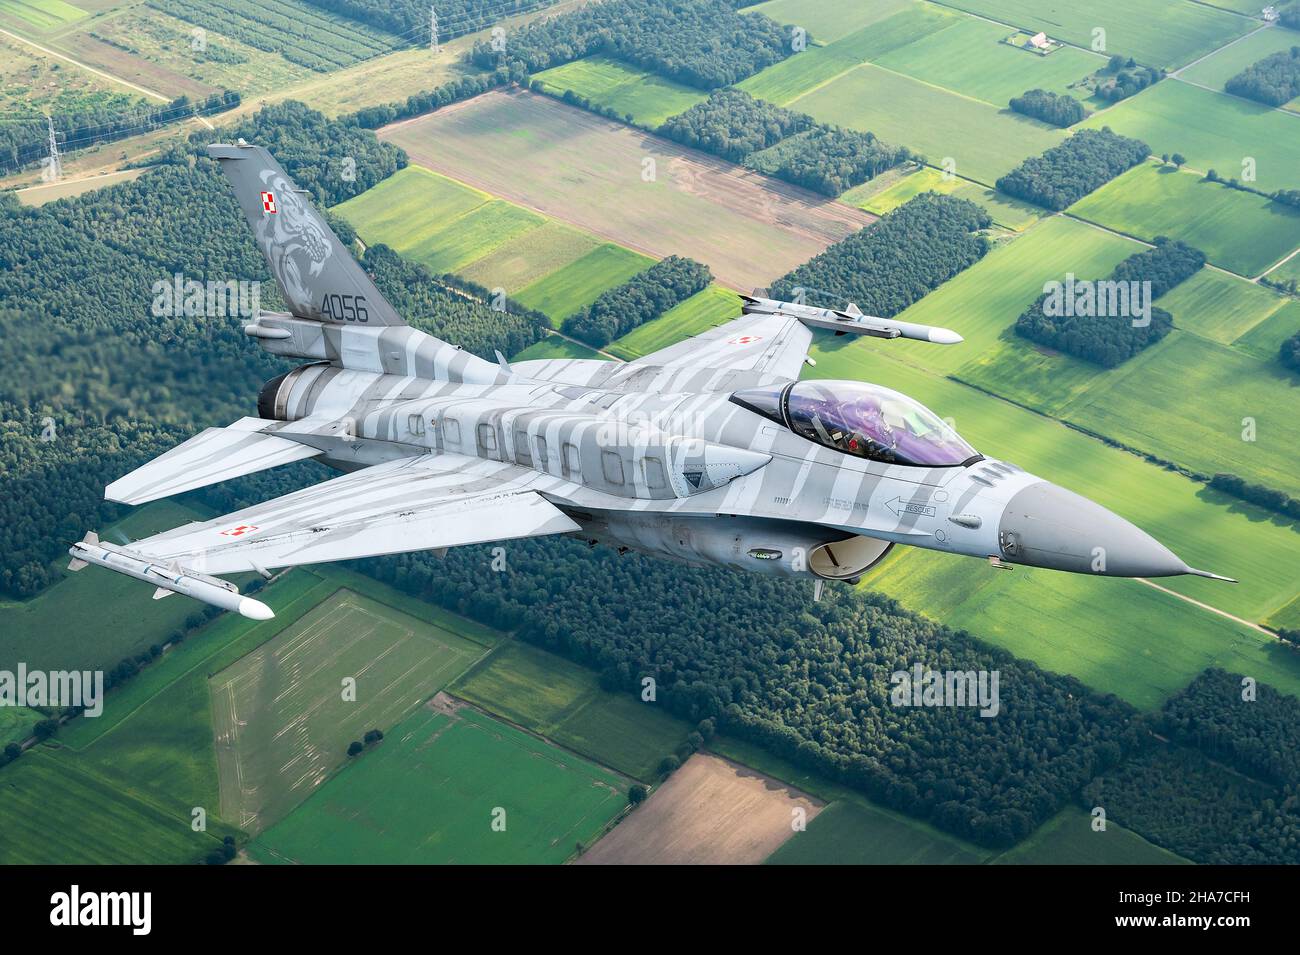 A F-16 Fighting Falcon fighter jet from the 31st Tactical Air Base of the Polish Air Force. Stock Photo